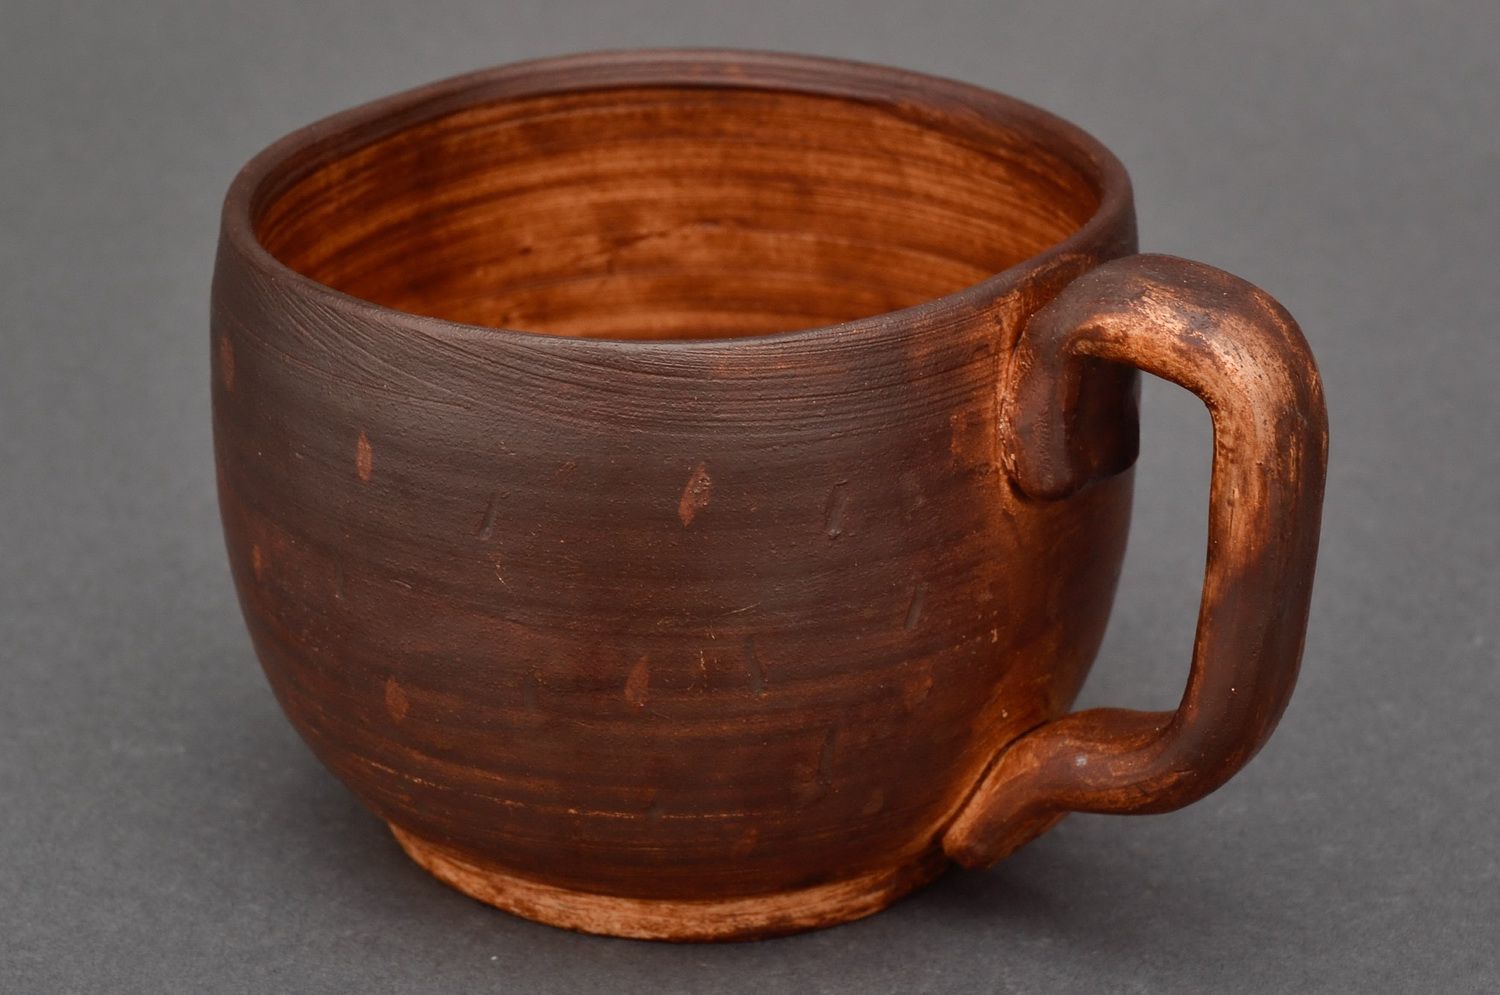 Red clay 8 oz coffee cup with handle and no pattern in brown natural color photo 1